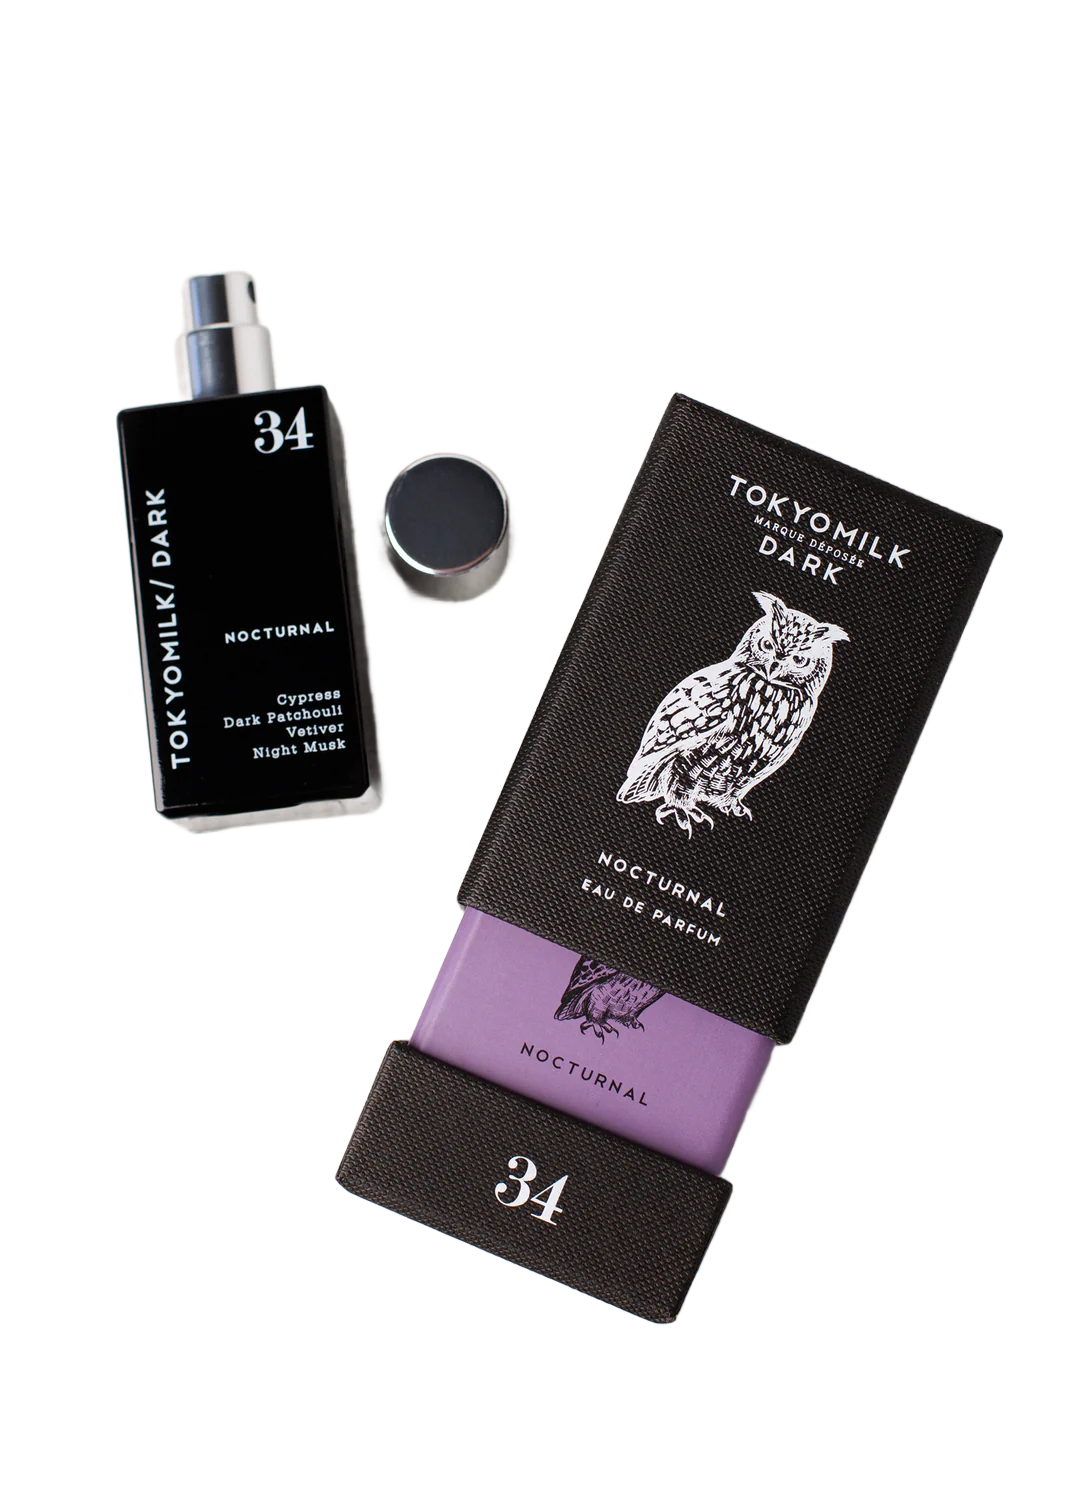 An image featuring a Margot Elena TokyoMilk Dark Nocturnal No. 34 Eau de Parfum bottle next to its box, which is decorated with an owl illustration, on a white background.